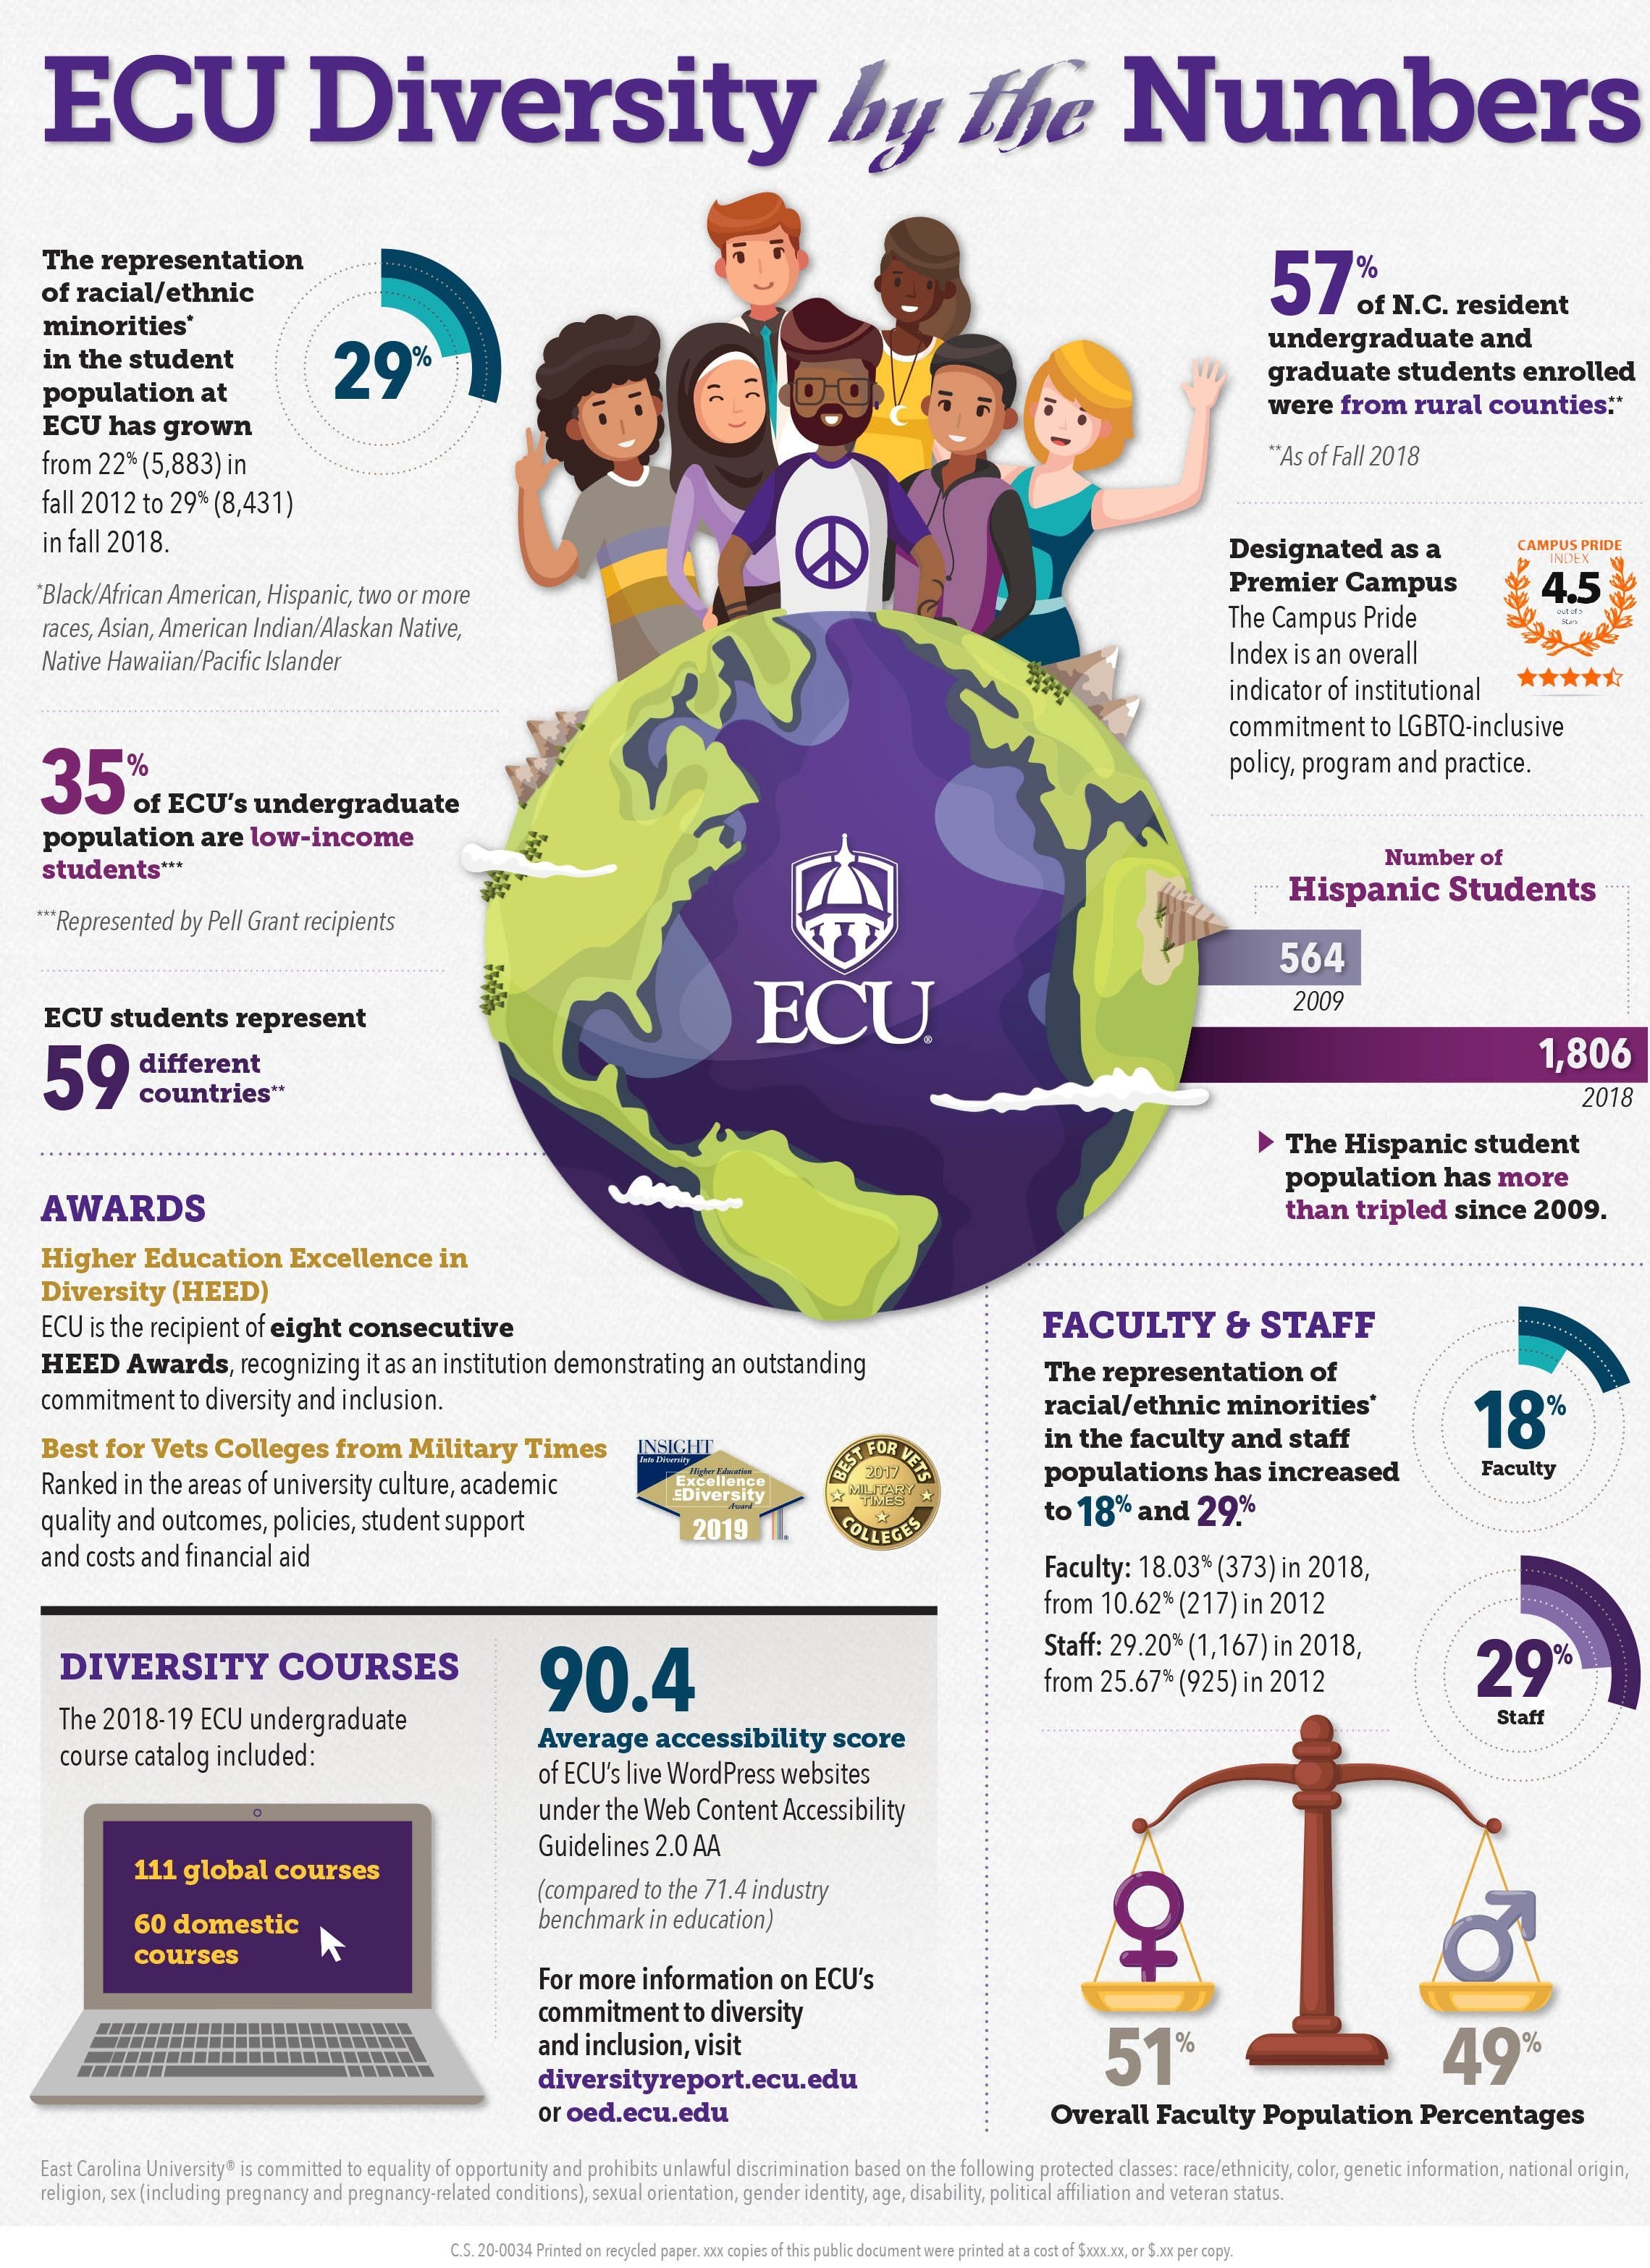 The representation of racial/ethnic minorities in the student population at ECU has grown from 22% in fall 2012 to 29% in fall 2018. Thirty-five percent of ECU's undergraduate population are low-income students. ECU students represent 59 different countries. Fifty-seven percent of N.C. resident undergraduate and graduate students enrolled were from rural counties.